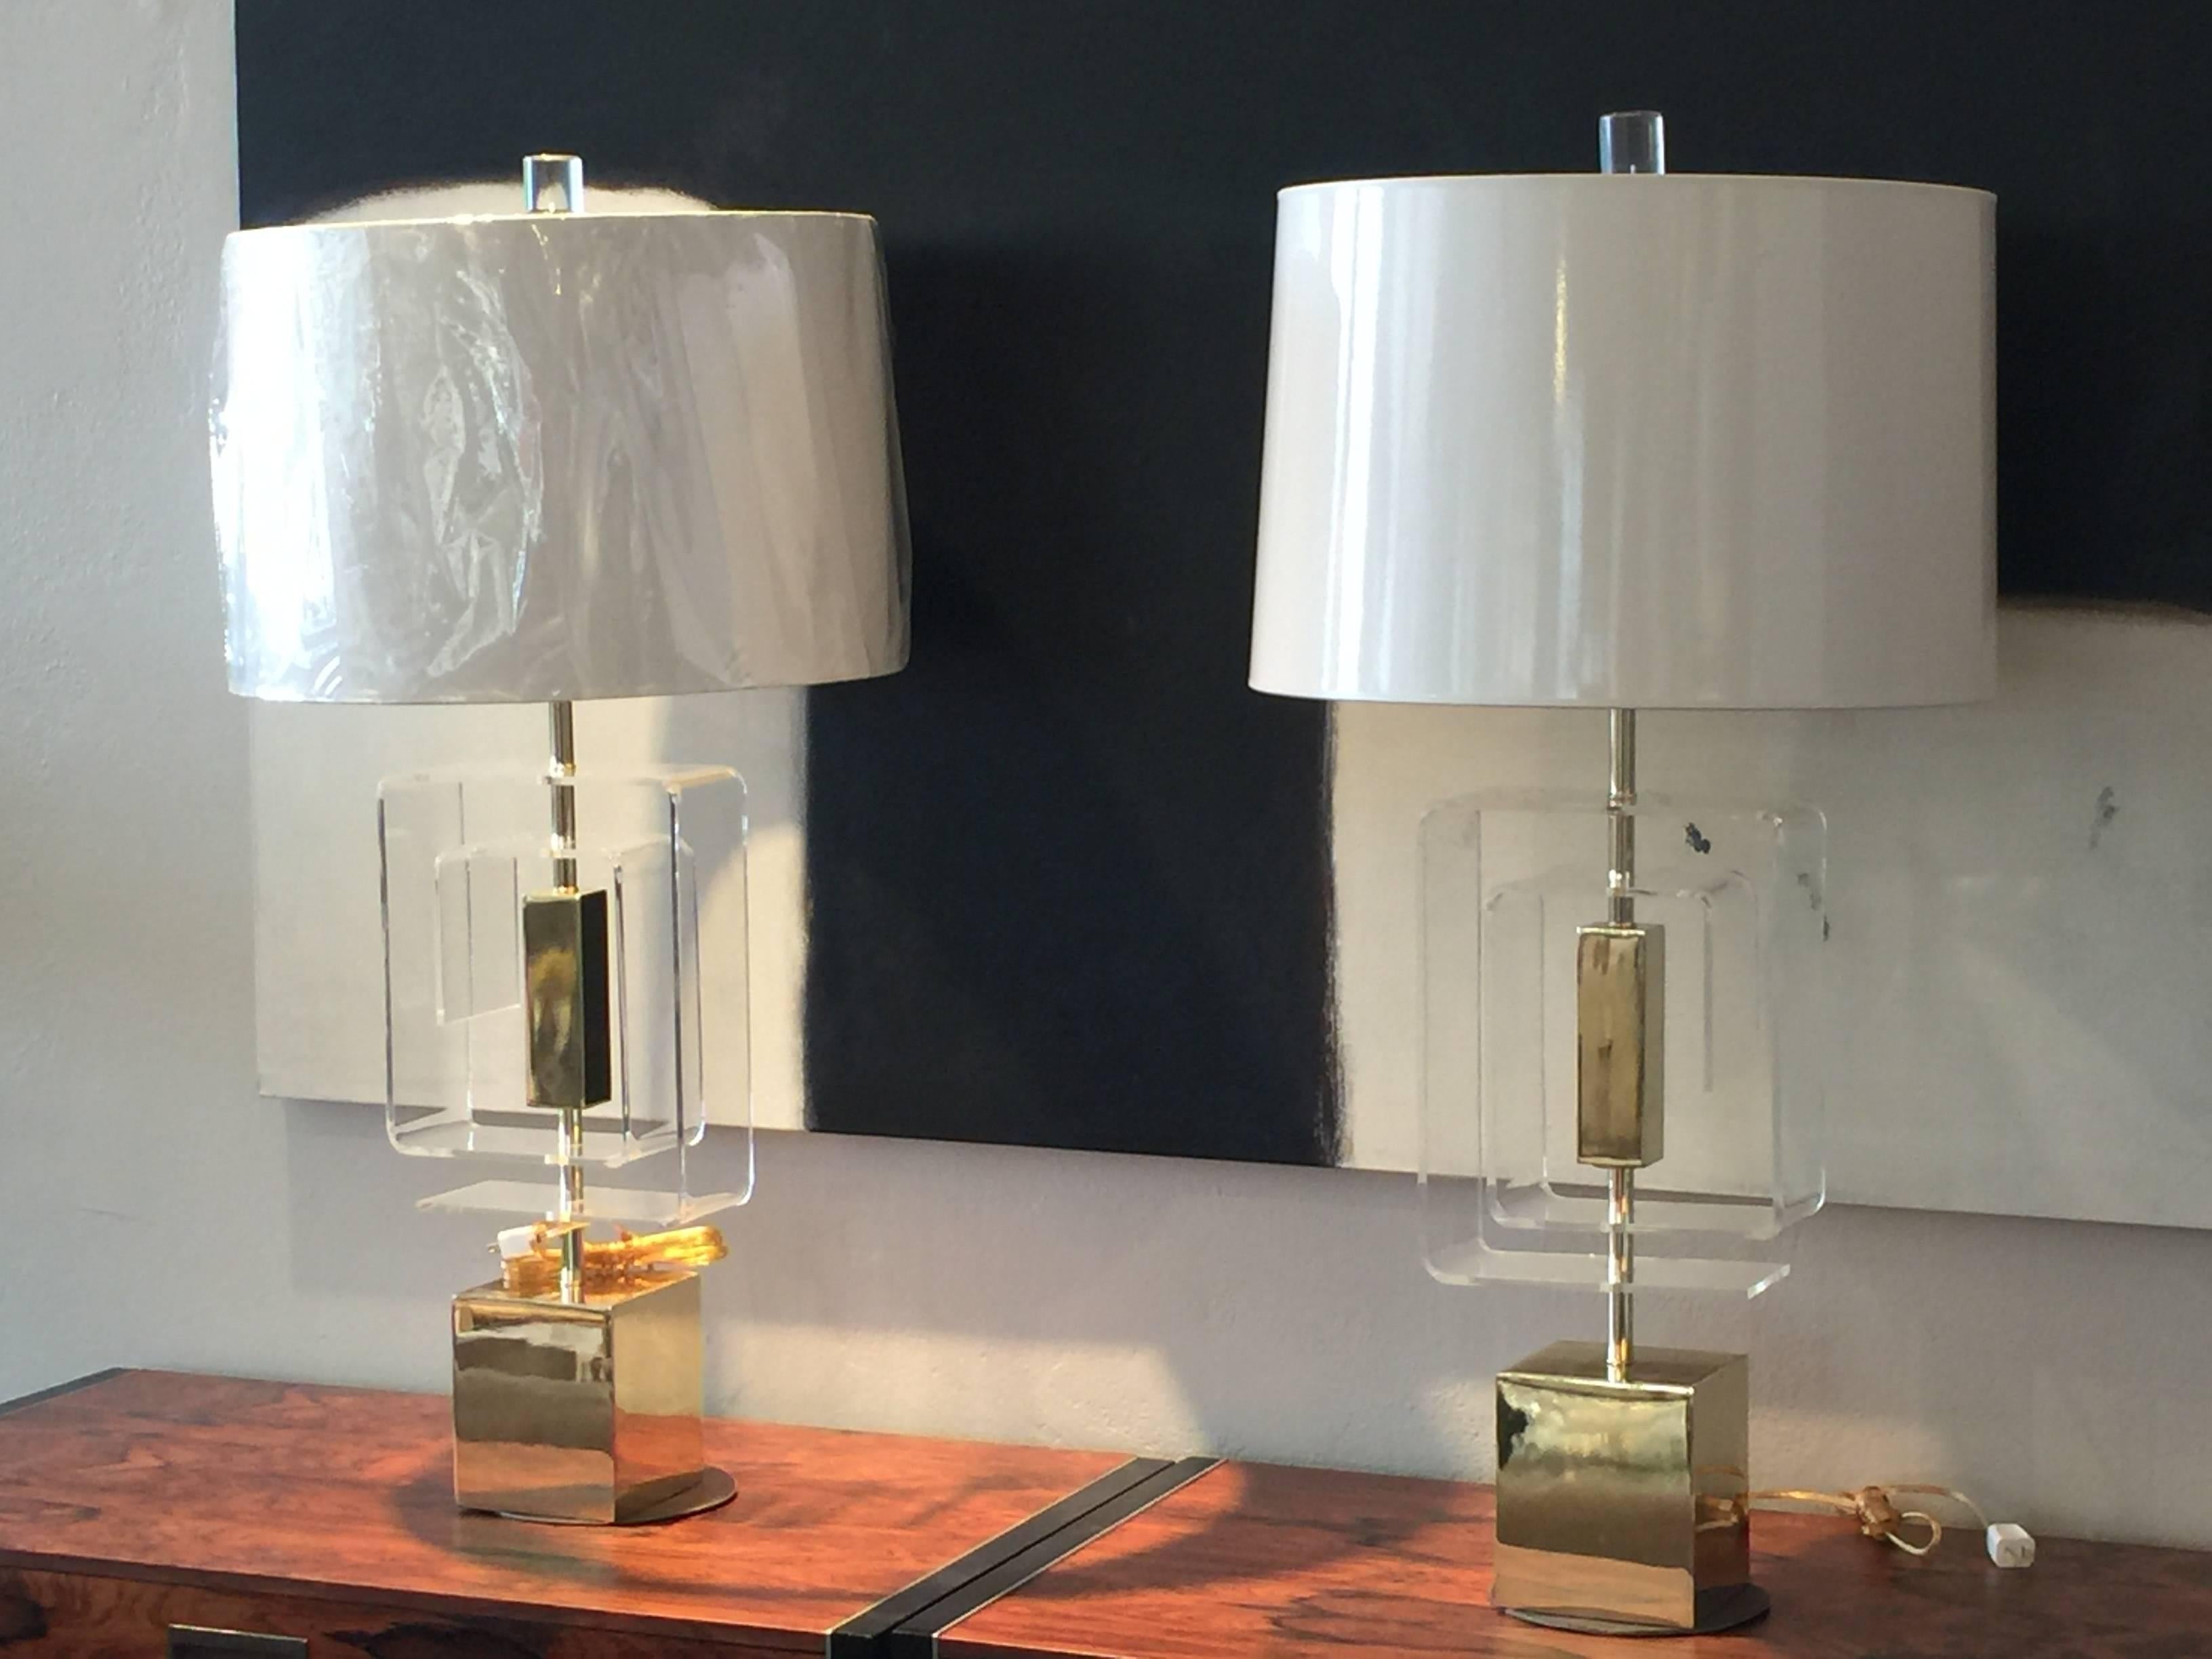 Pair of Lucite and brass lamps by Laurel. There is a minor imperfection on top of one of the bases. Lamps have recently been newly wired.

Dimensions: 9" W x 5" D x 26" T (to socket).

Shades not included.